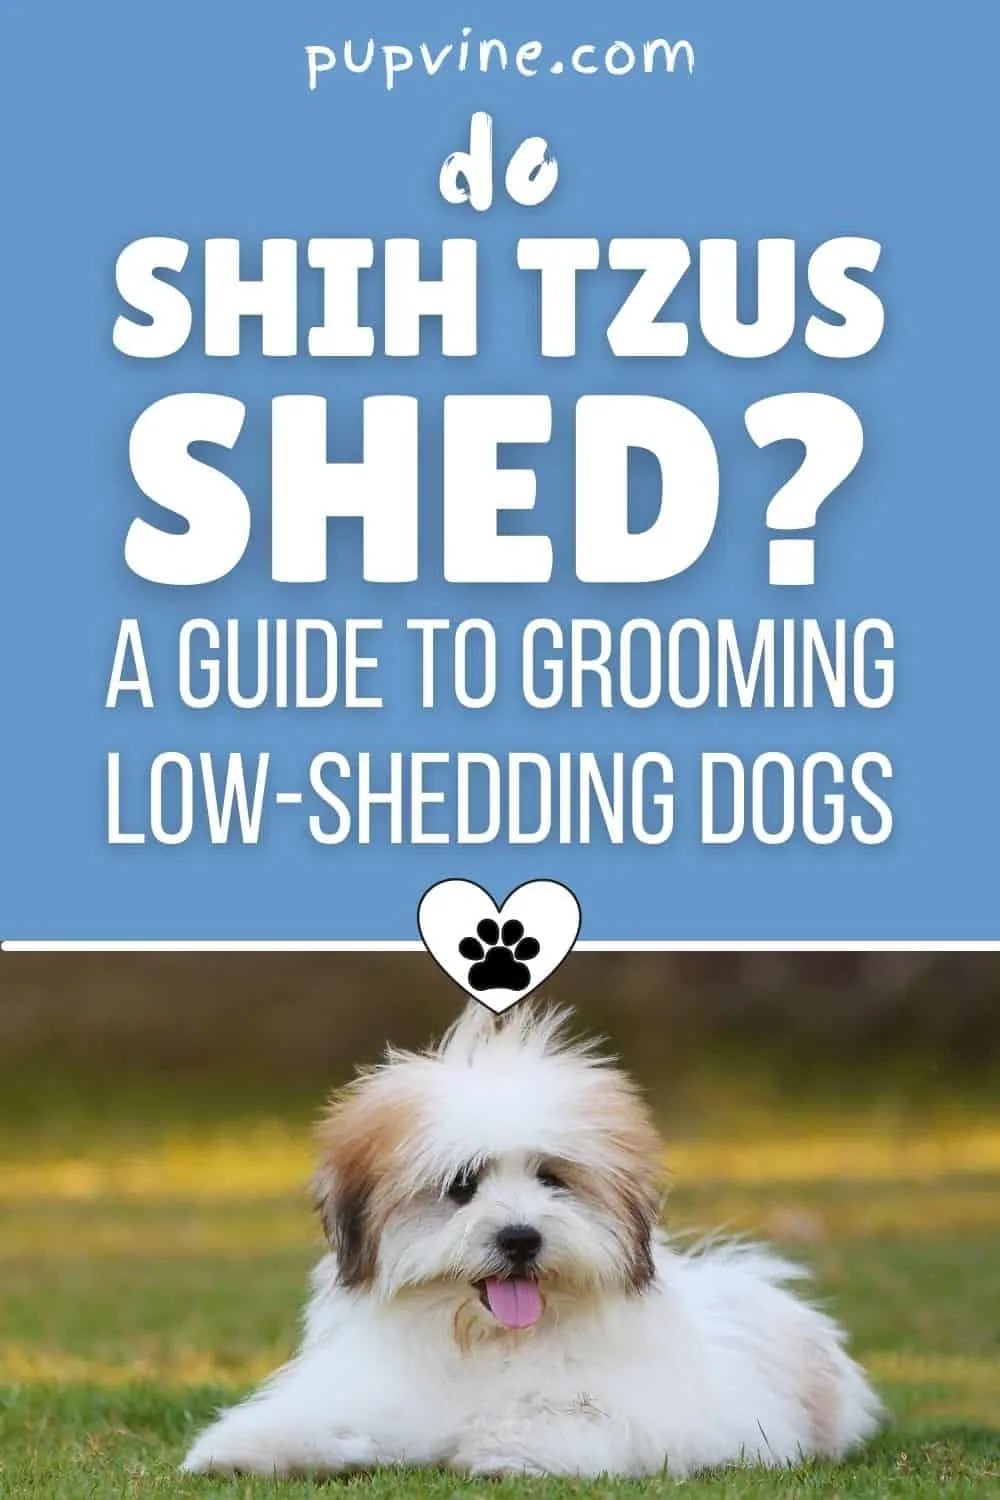 Do Shih Tzus Shed? A Guide To Grooming Low-Shedding Dogs